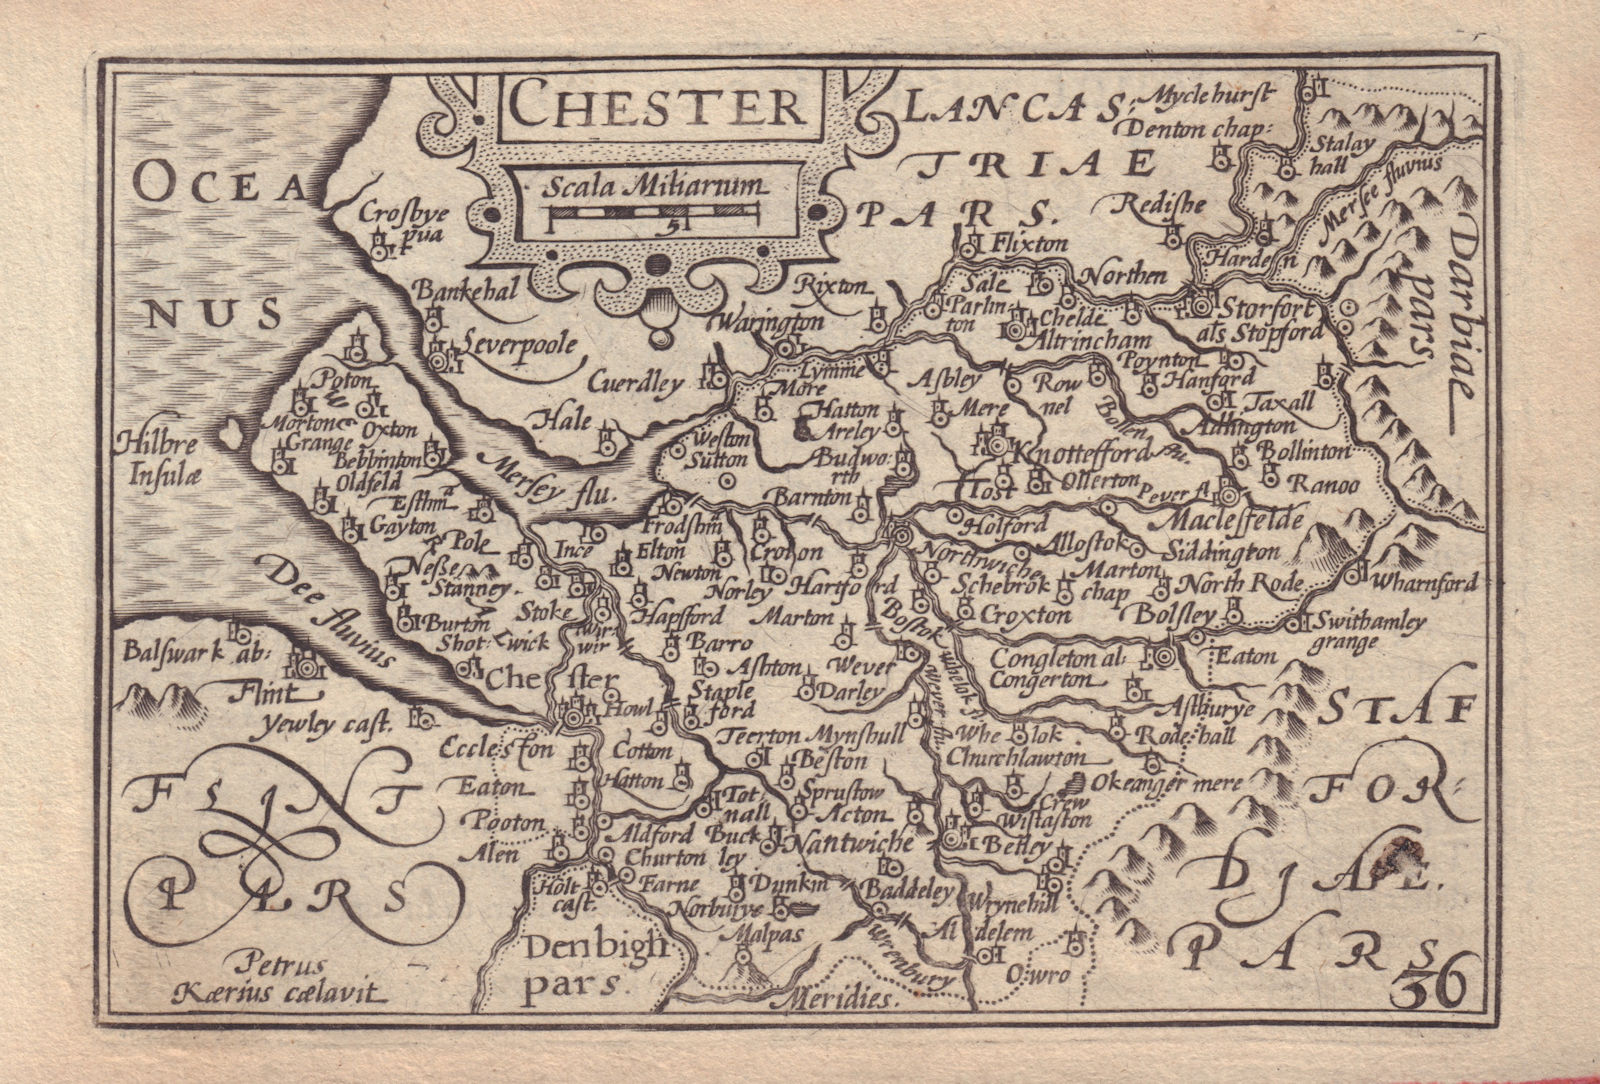 Chester by van den Keere. "Speed miniature" Cheshire county map 1632 old